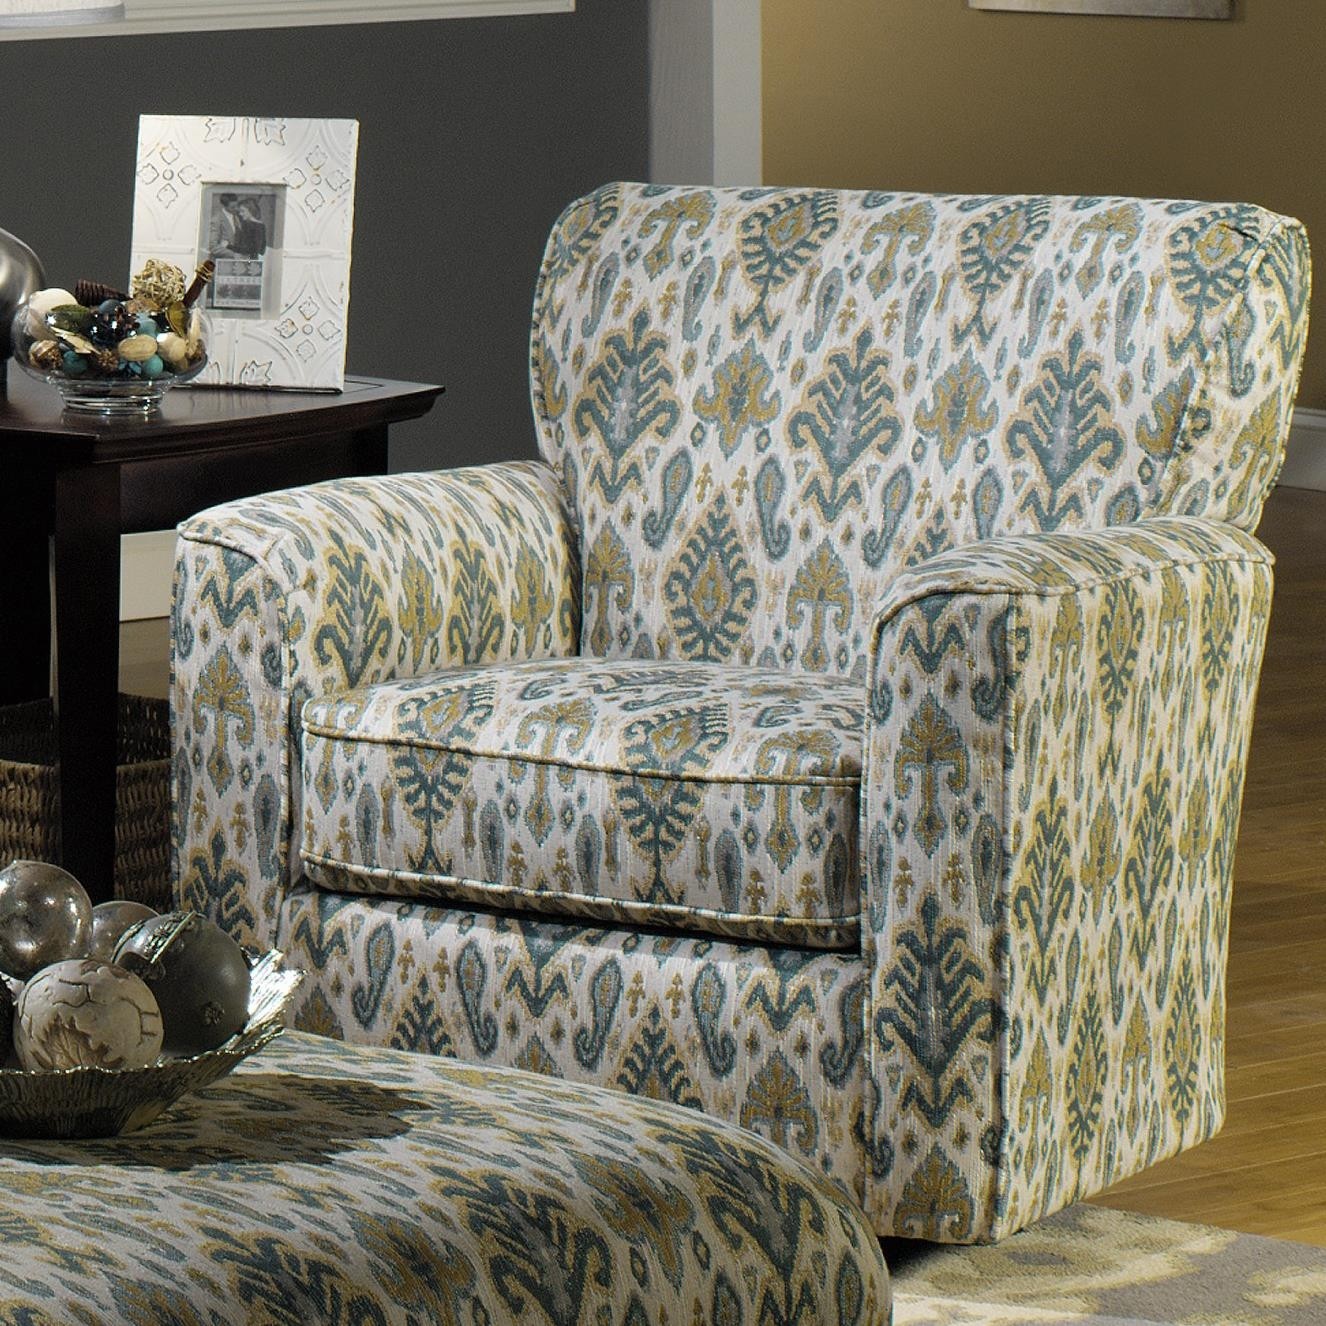 Craftmaster accent chairs contemporary upholstered swivel